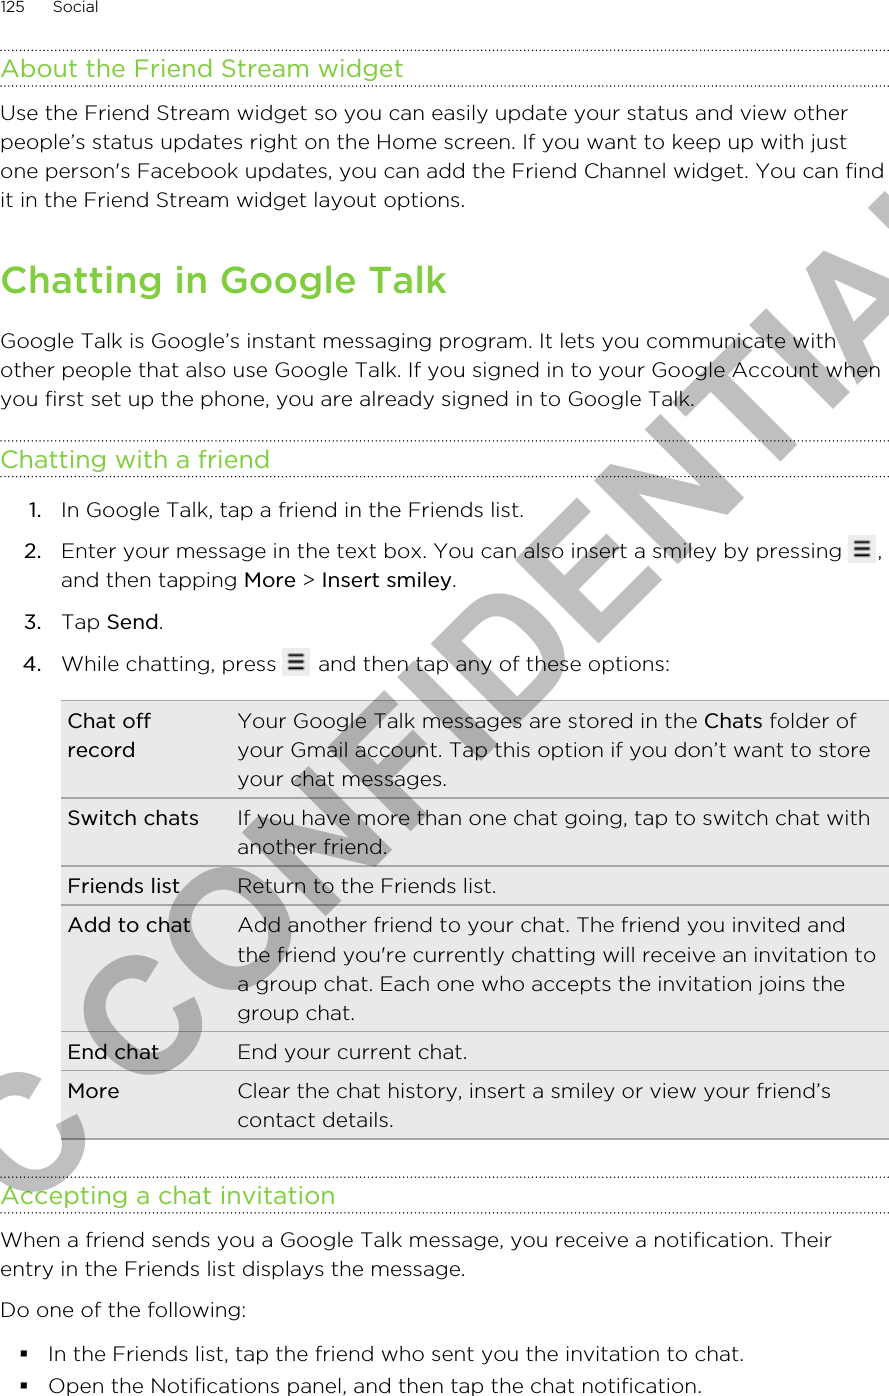 About the Friend Stream widgetUse the Friend Stream widget so you can easily update your status and view otherpeople’s status updates right on the Home screen. If you want to keep up with justone person&apos;s Facebook updates, you can add the Friend Channel widget. You can findit in the Friend Stream widget layout options.Chatting in Google TalkGoogle Talk is Google’s instant messaging program. It lets you communicate withother people that also use Google Talk. If you signed in to your Google Account whenyou first set up the phone, you are already signed in to Google Talk.Chatting with a friend1. In Google Talk, tap a friend in the Friends list.2. Enter your message in the text box. You can also insert a smiley by pressing  ,and then tapping More &gt; Insert smiley.3. Tap Send.4. While chatting, press   and then tap any of these options:Chat offrecordYour Google Talk messages are stored in the Chats folder ofyour Gmail account. Tap this option if you don’t want to storeyour chat messages.Switch chats If you have more than one chat going, tap to switch chat withanother friend.Friends list Return to the Friends list.Add to chat Add another friend to your chat. The friend you invited andthe friend you&apos;re currently chatting will receive an invitation toa group chat. Each one who accepts the invitation joins thegroup chat.End chat End your current chat.More Clear the chat history, insert a smiley or view your friend’scontact details.Accepting a chat invitationWhen a friend sends you a Google Talk message, you receive a notification. Theirentry in the Friends list displays the message.Do one of the following:§In the Friends list, tap the friend who sent you the invitation to chat.§Open the Notifications panel, and then tap the chat notification.125 SocialHTC CONFIDENTIAL